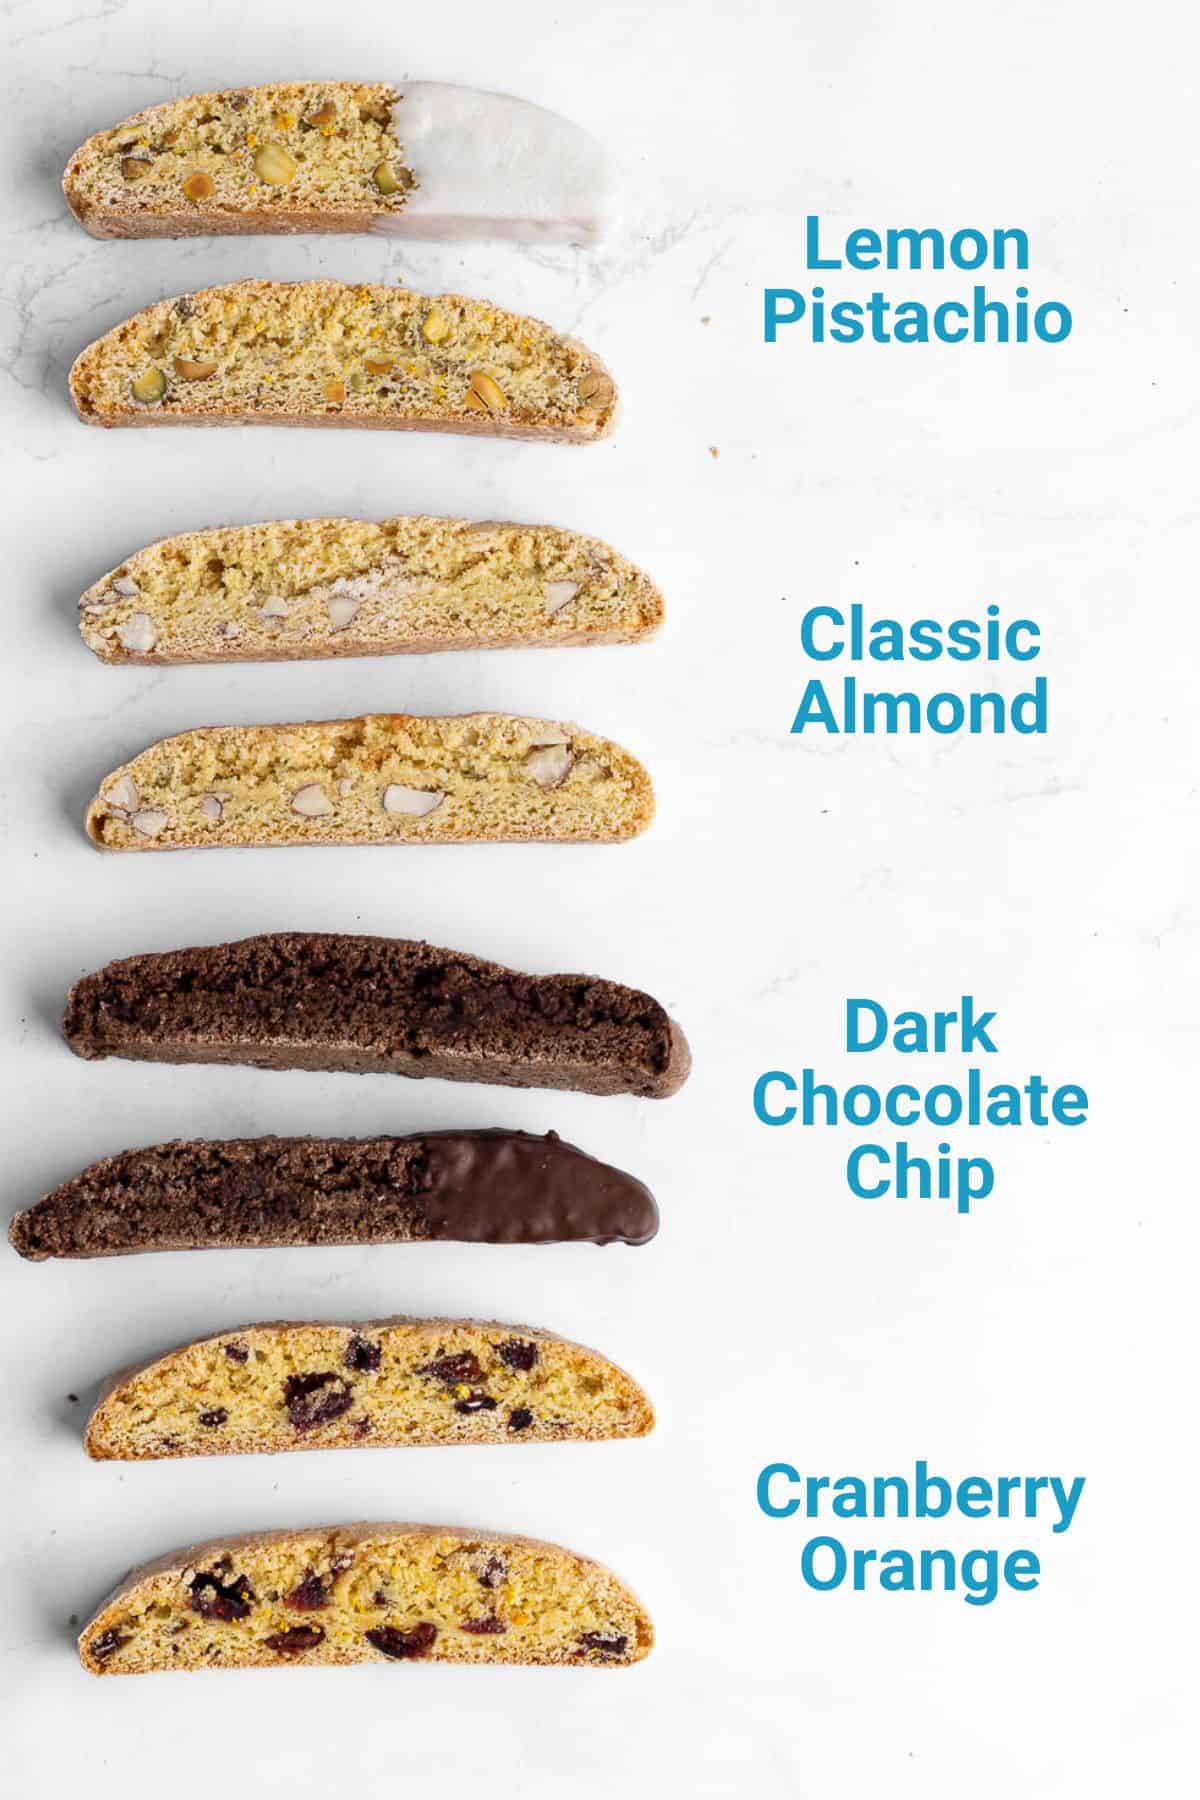 Biscotti cookies four ways: lemon pistachio, classic almond, dark chocolate chip, and cranberry orange. Two of each flavor lined up vertically with text.